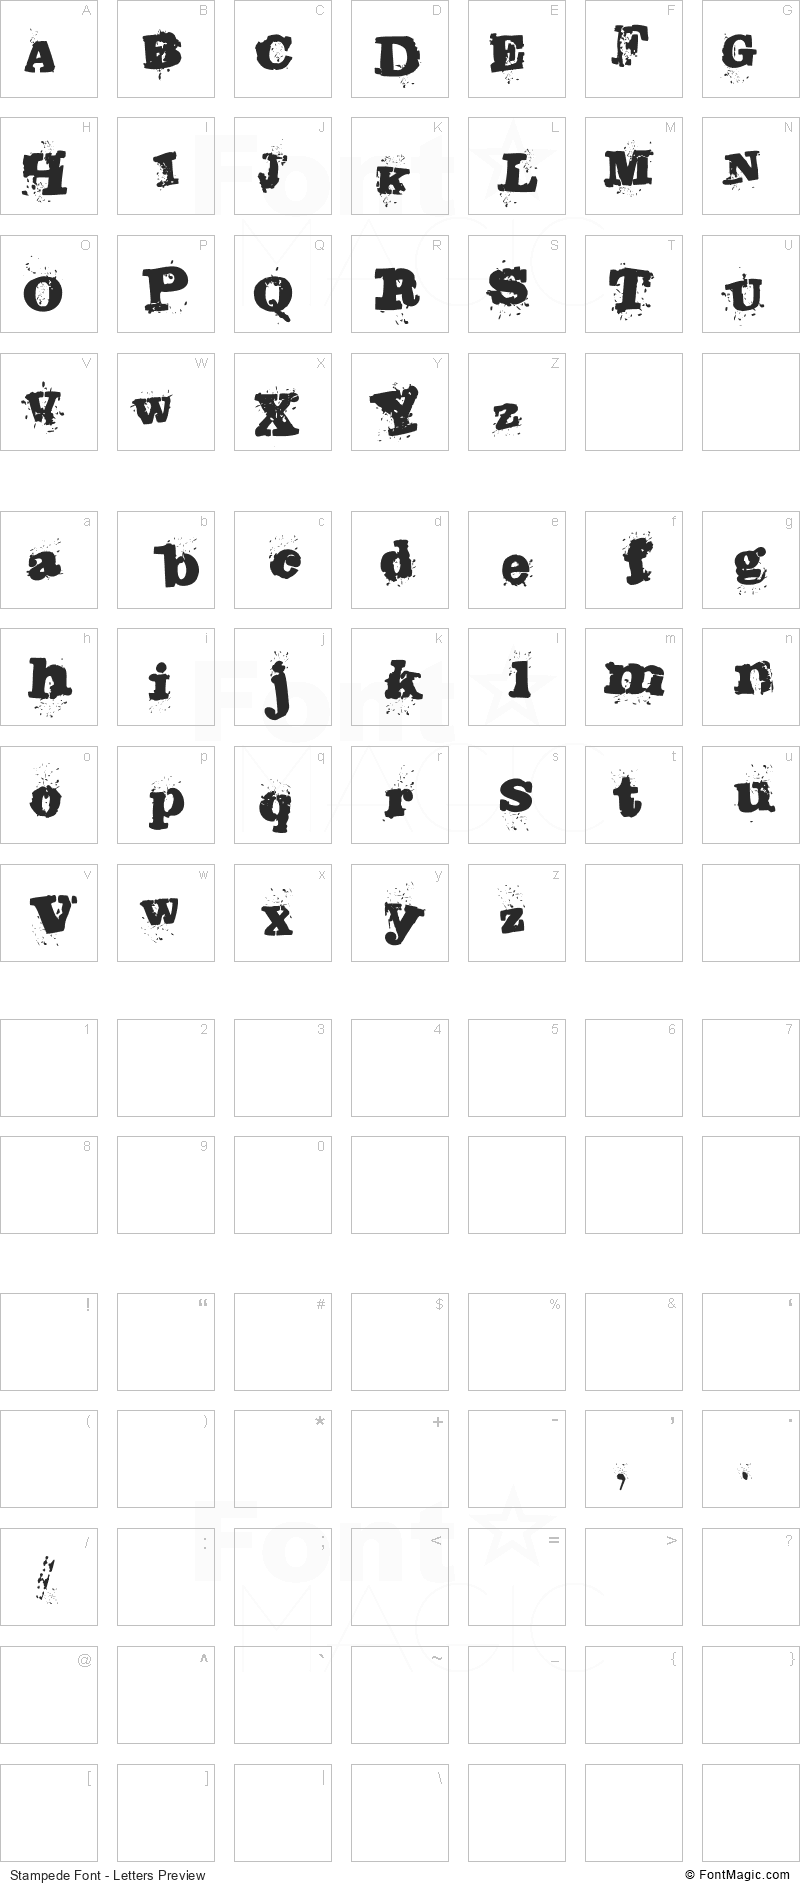 Stampede Font - All Latters Preview Chart